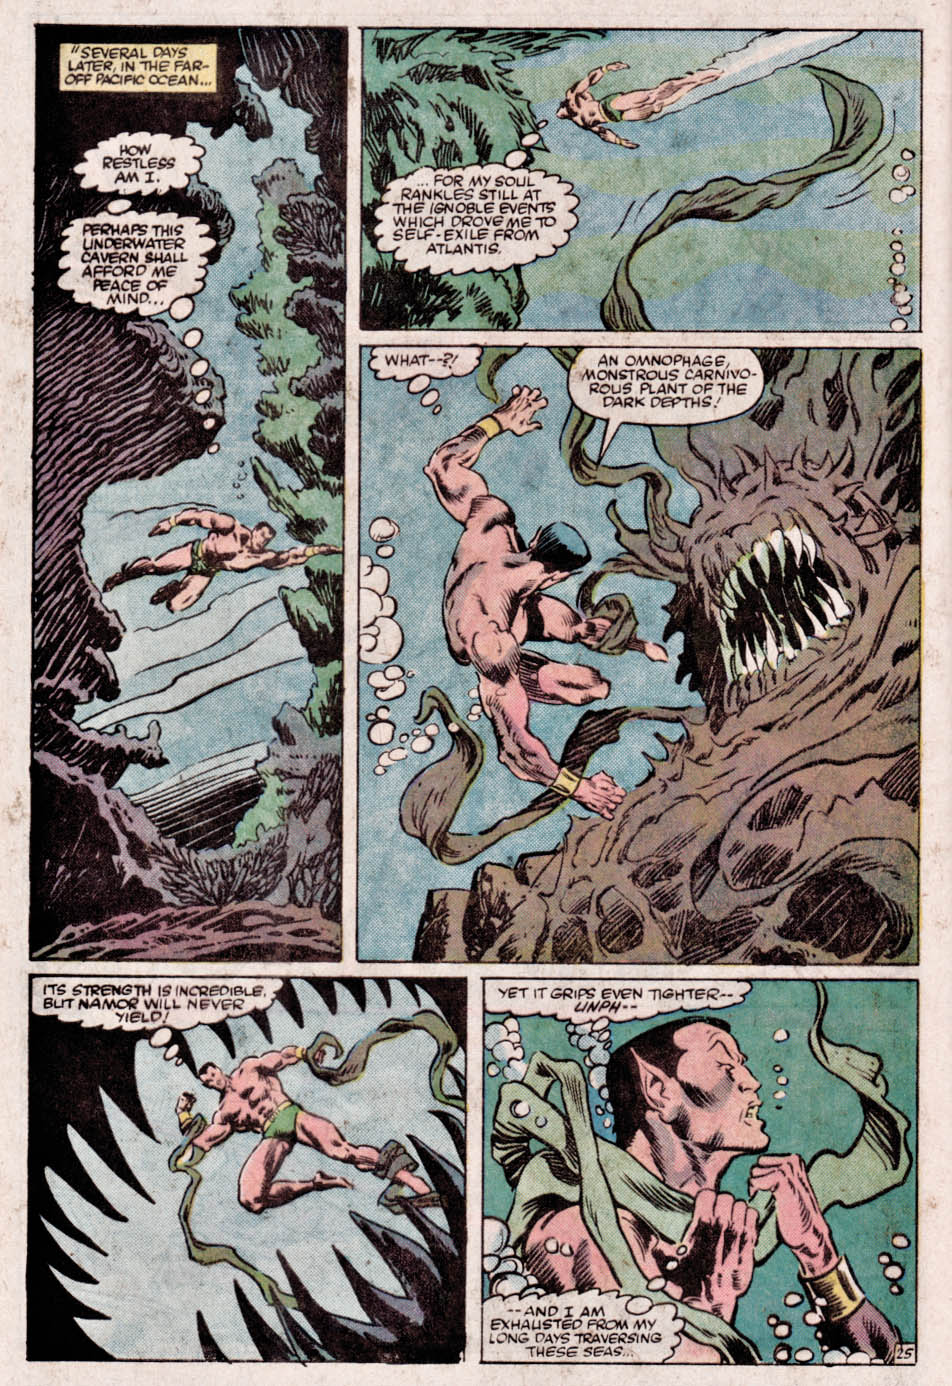 What If? (1977) issue 41 - The Sub-mariner had saved Atlantis from its destiny - Page 25